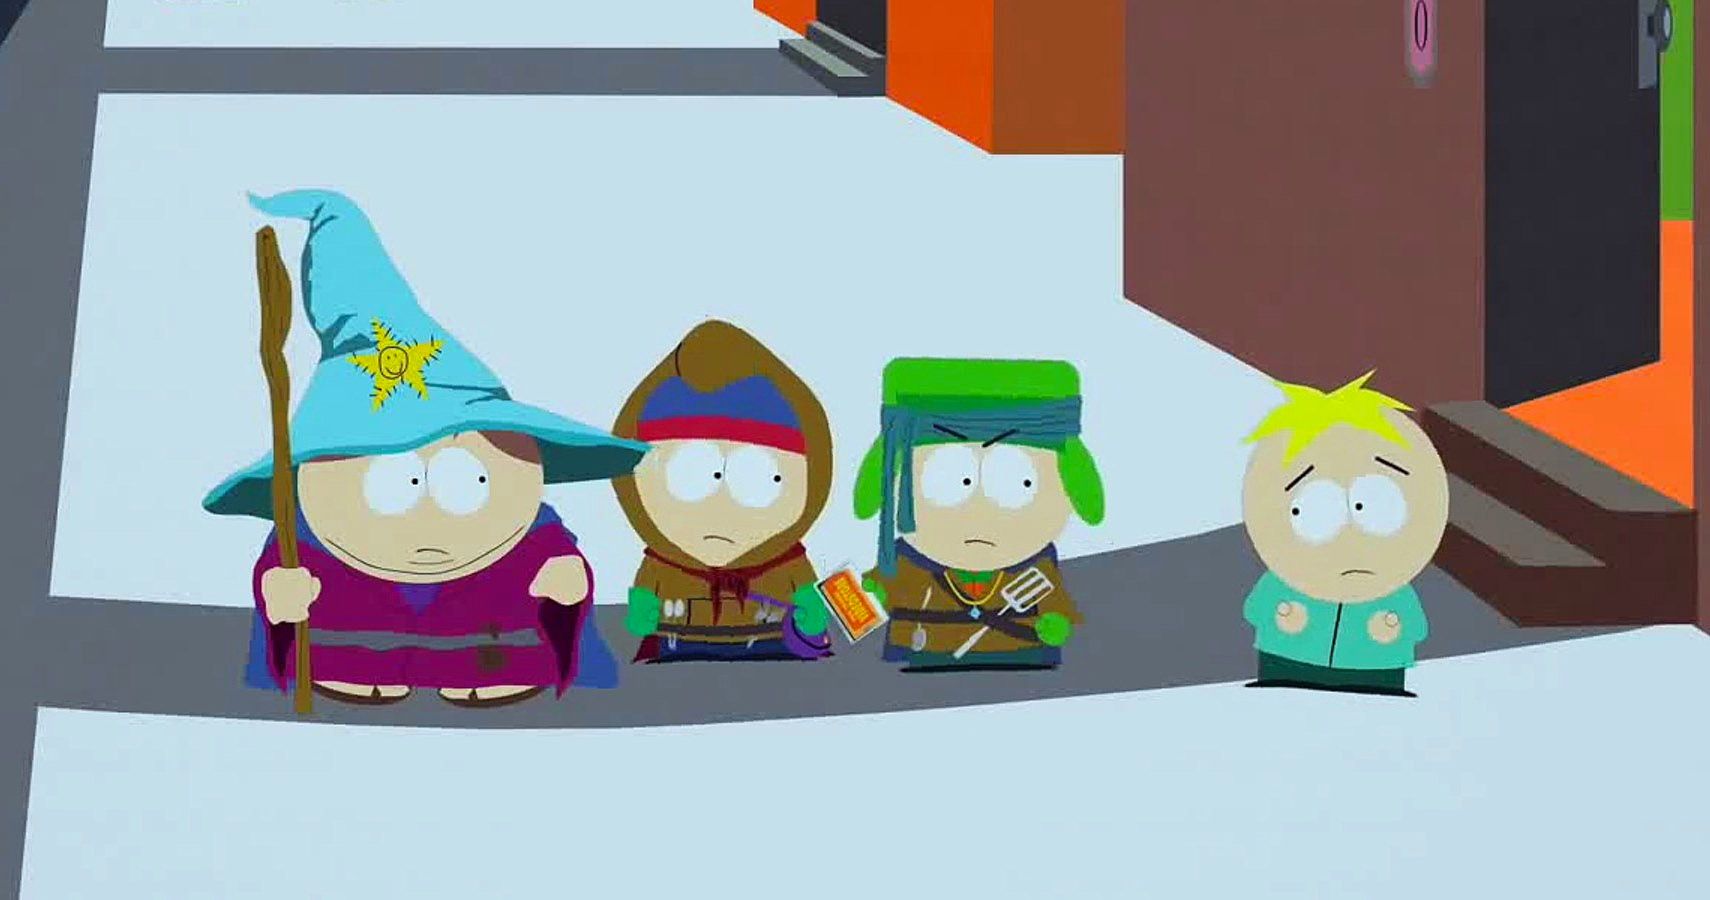 10 Best Episodes Of South Park According To IMDb